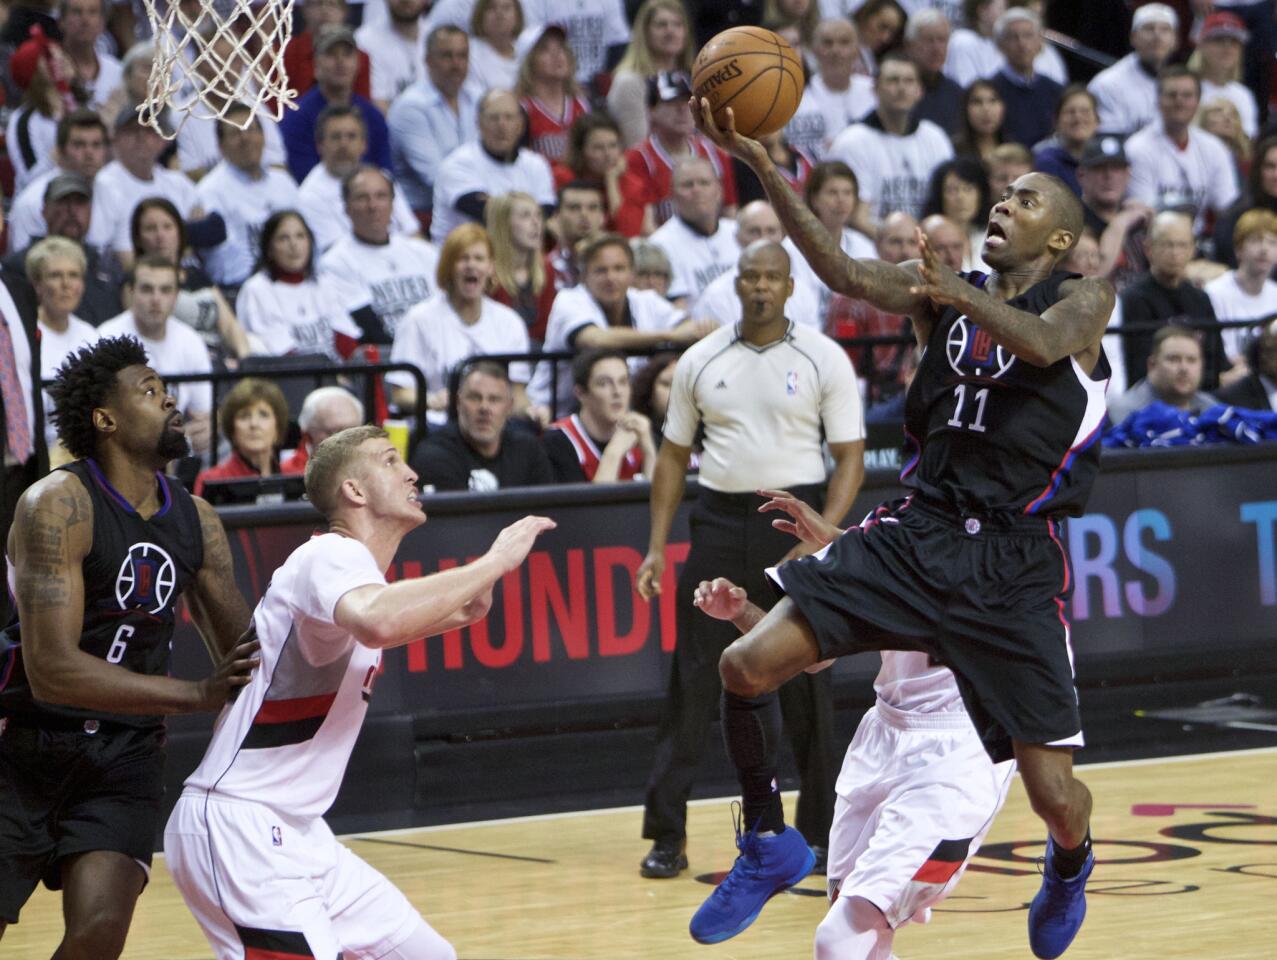 Clippers guard Jamal Crawford drives to the basket for a layup over Trail Blazers center Mason Plumlee during the second half of Game 6.